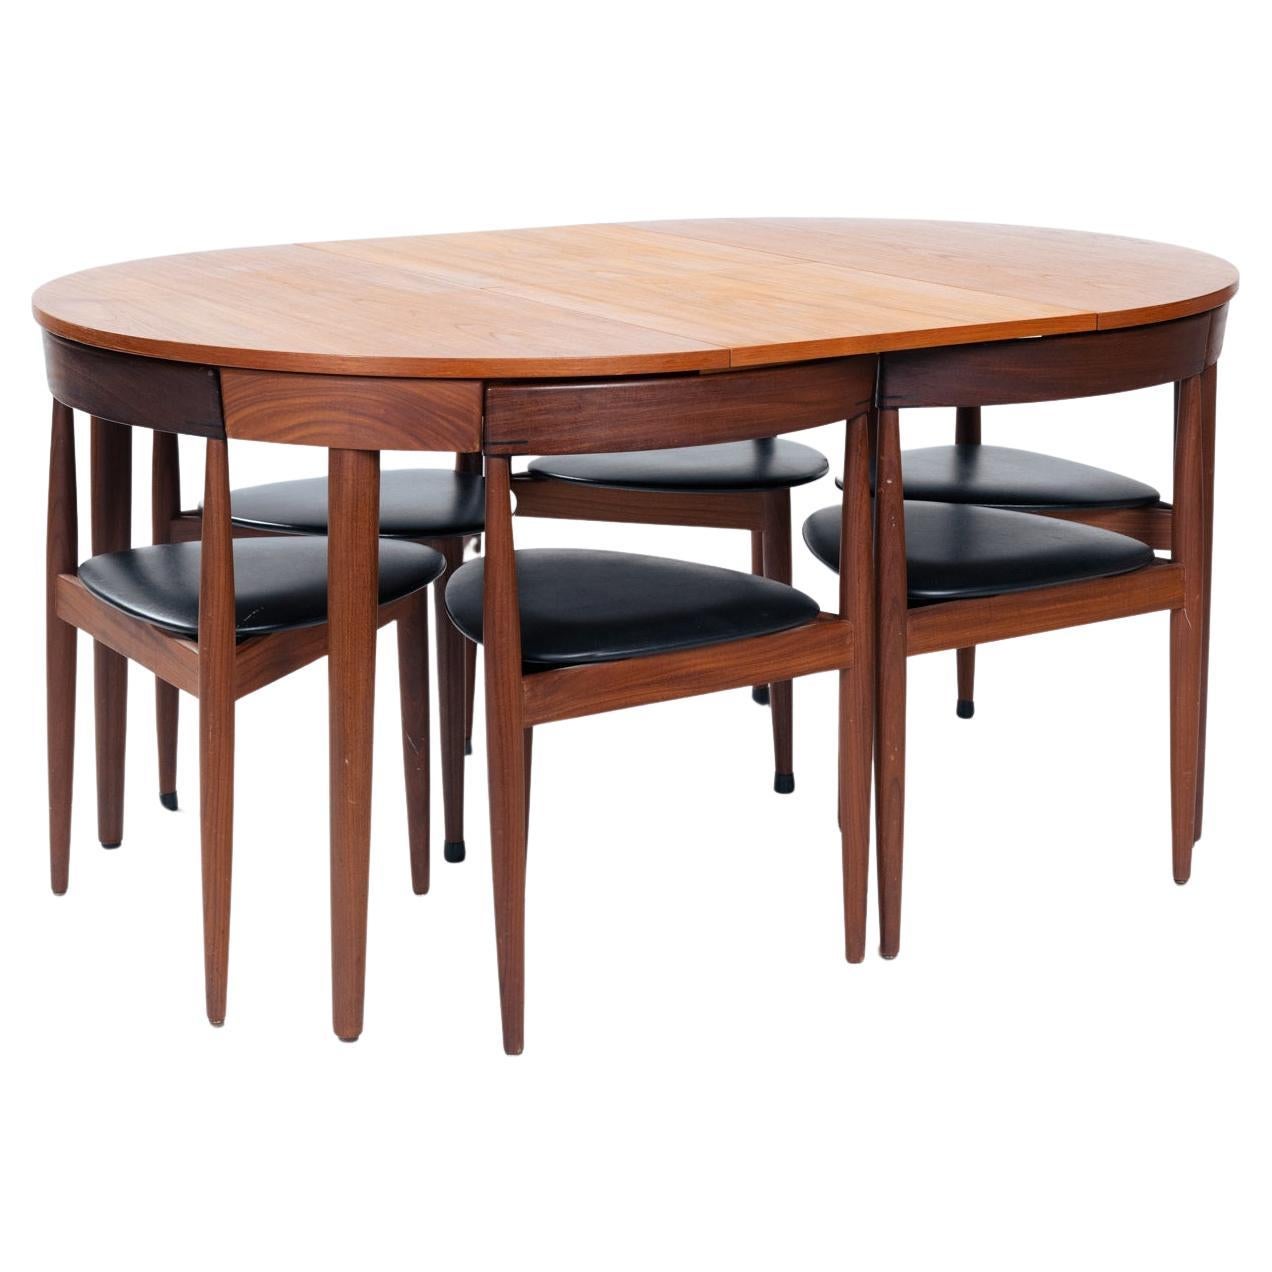 Round or oval? Its your call! 
Danish Mid Century Hans Olsen Roundette space saving extending teak dining table with 6 chairs by Frem Røjle. 

Originally designed by Hans Olsen in 1952 for Frem Røjle this dining set has since become an icon of